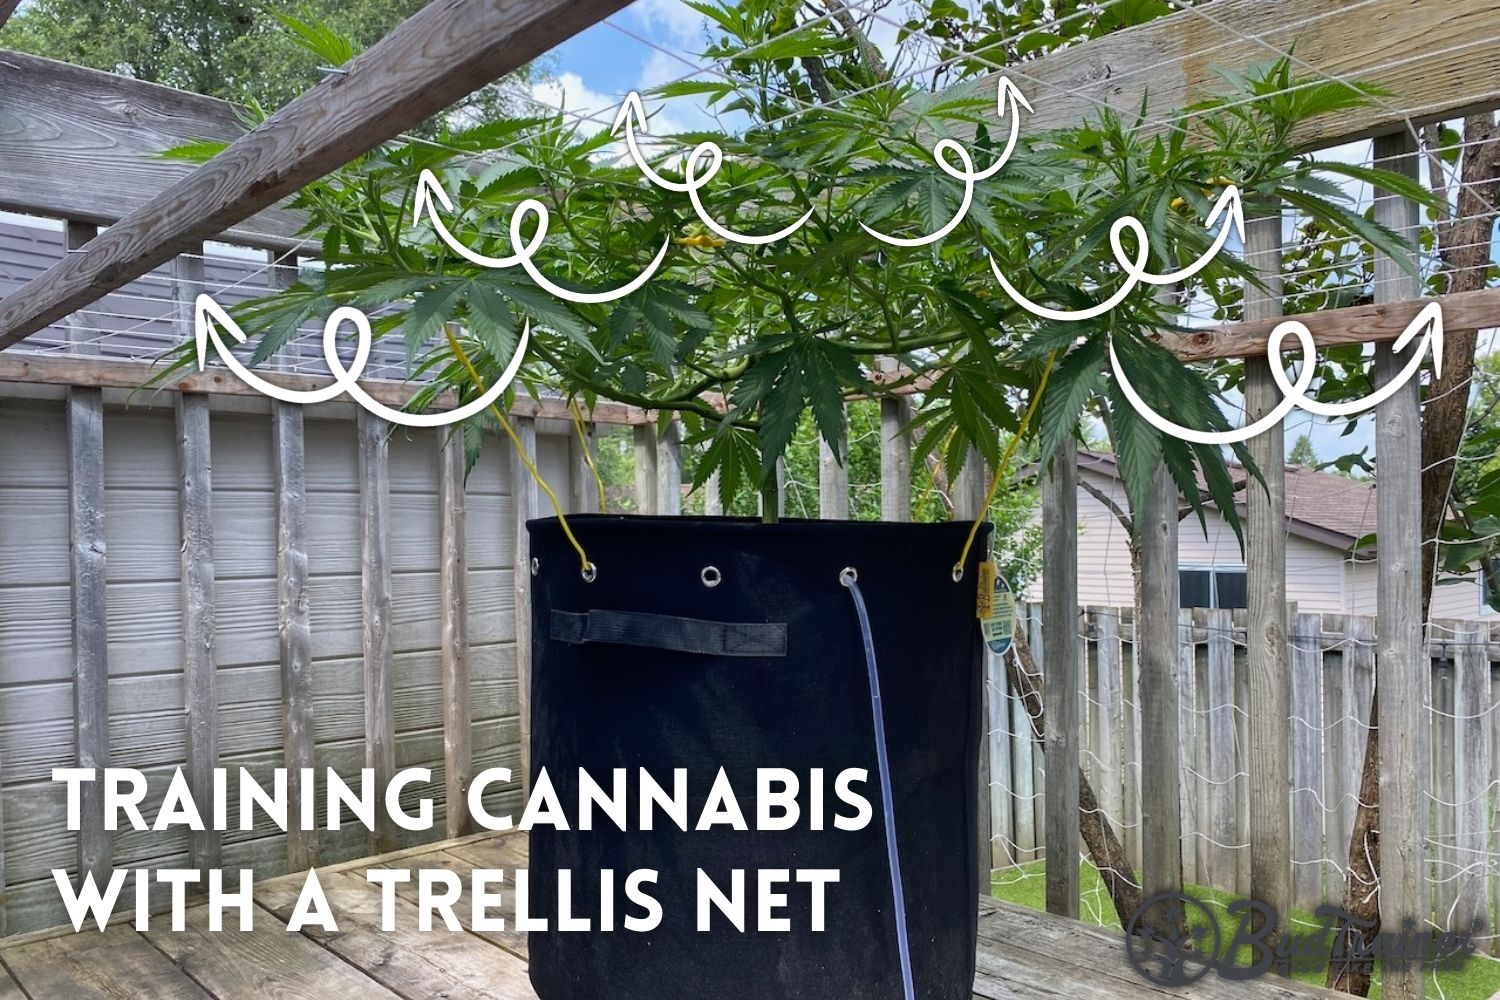 A cannabis plant in a black fabric pot is trained using a trellis net on an outdoor wooden deck. White arrows indicate the training direction of the branches through the trellis net.